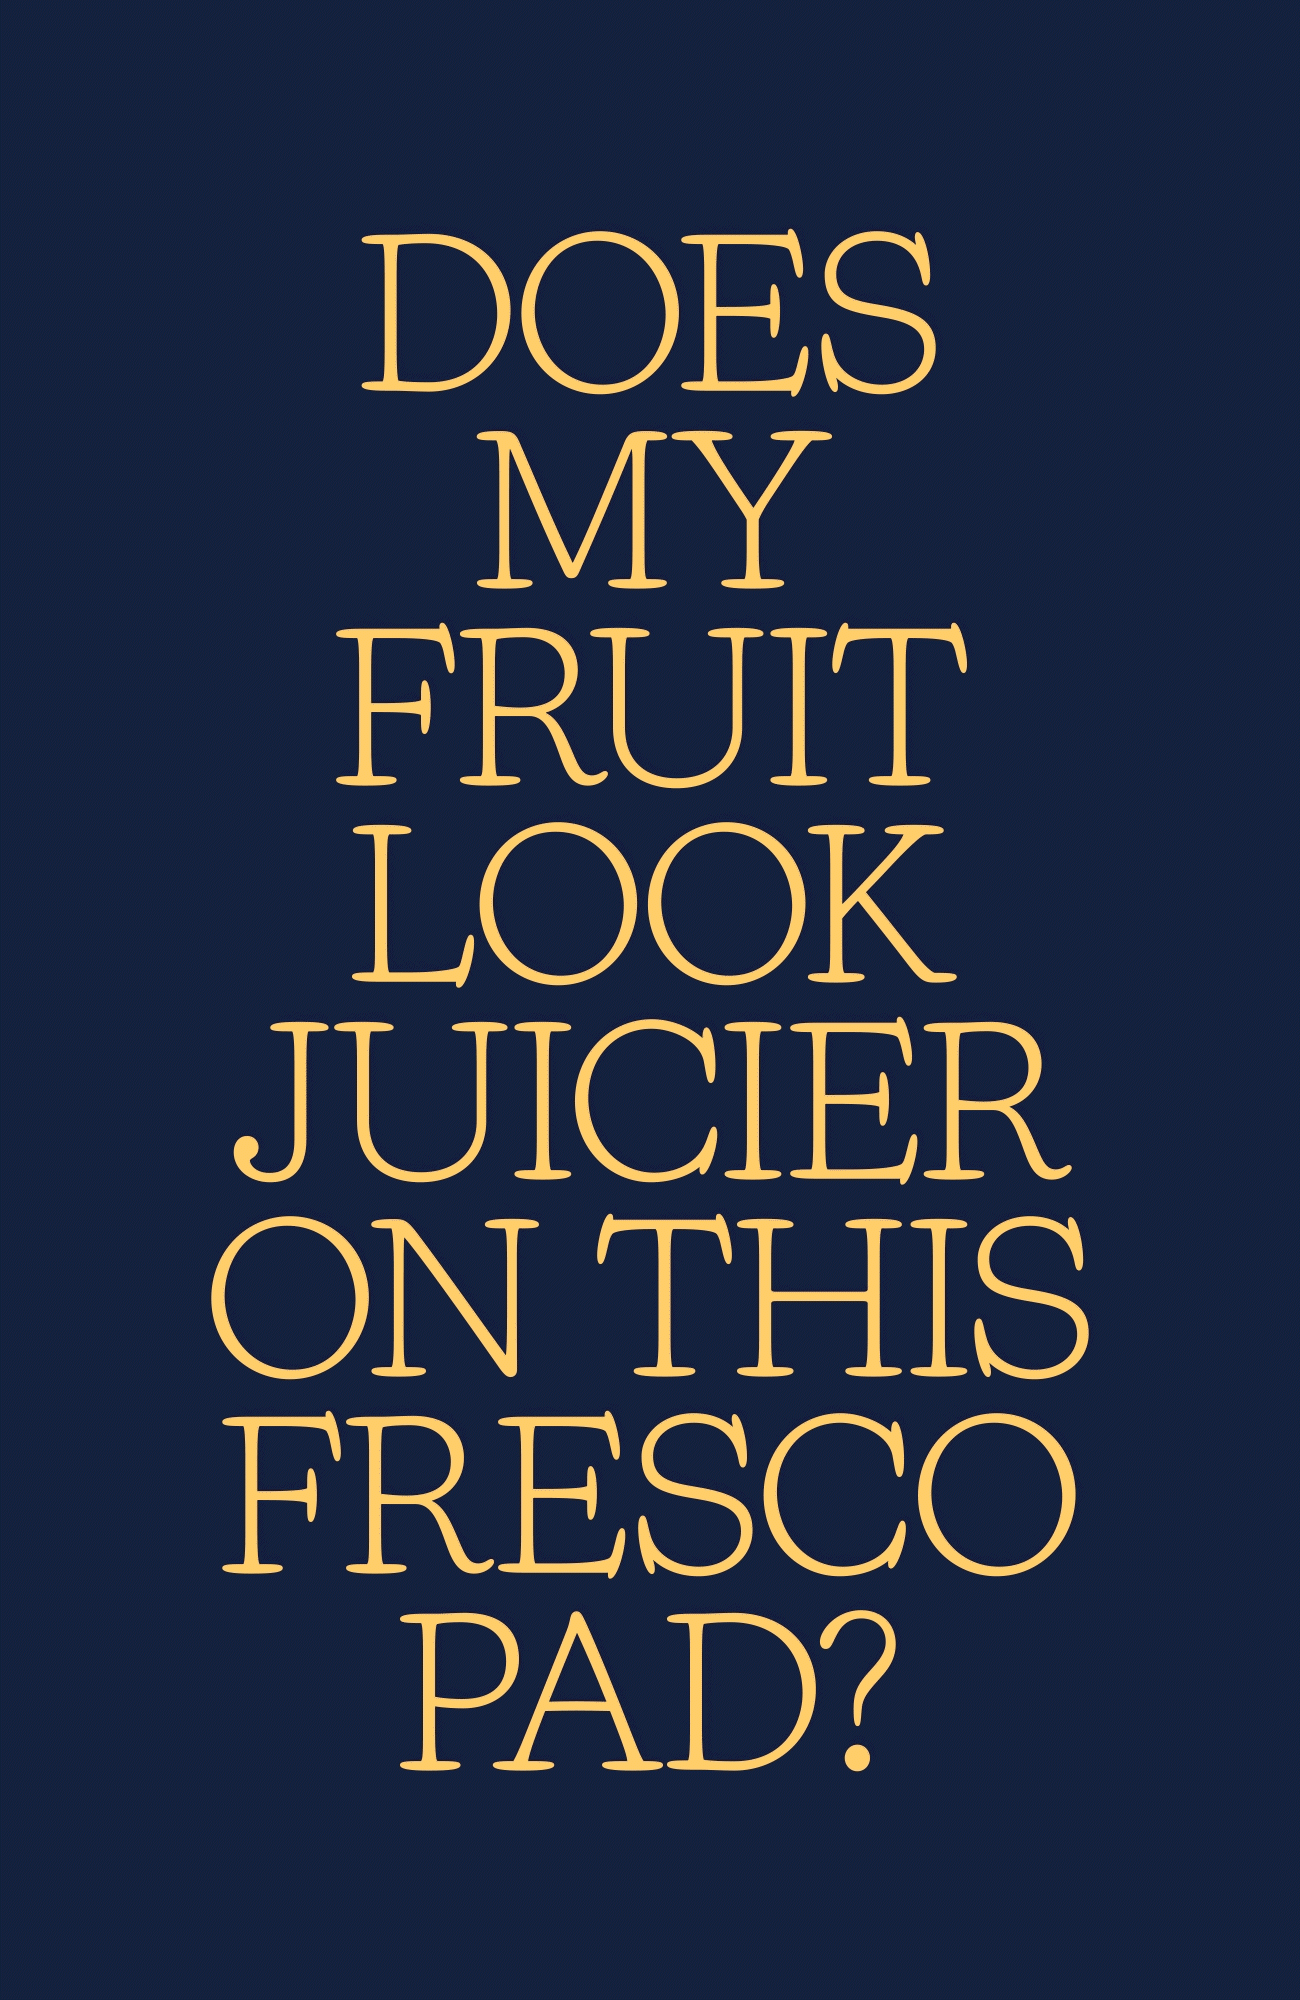 Does my fruit look juicer on this fresco pad?